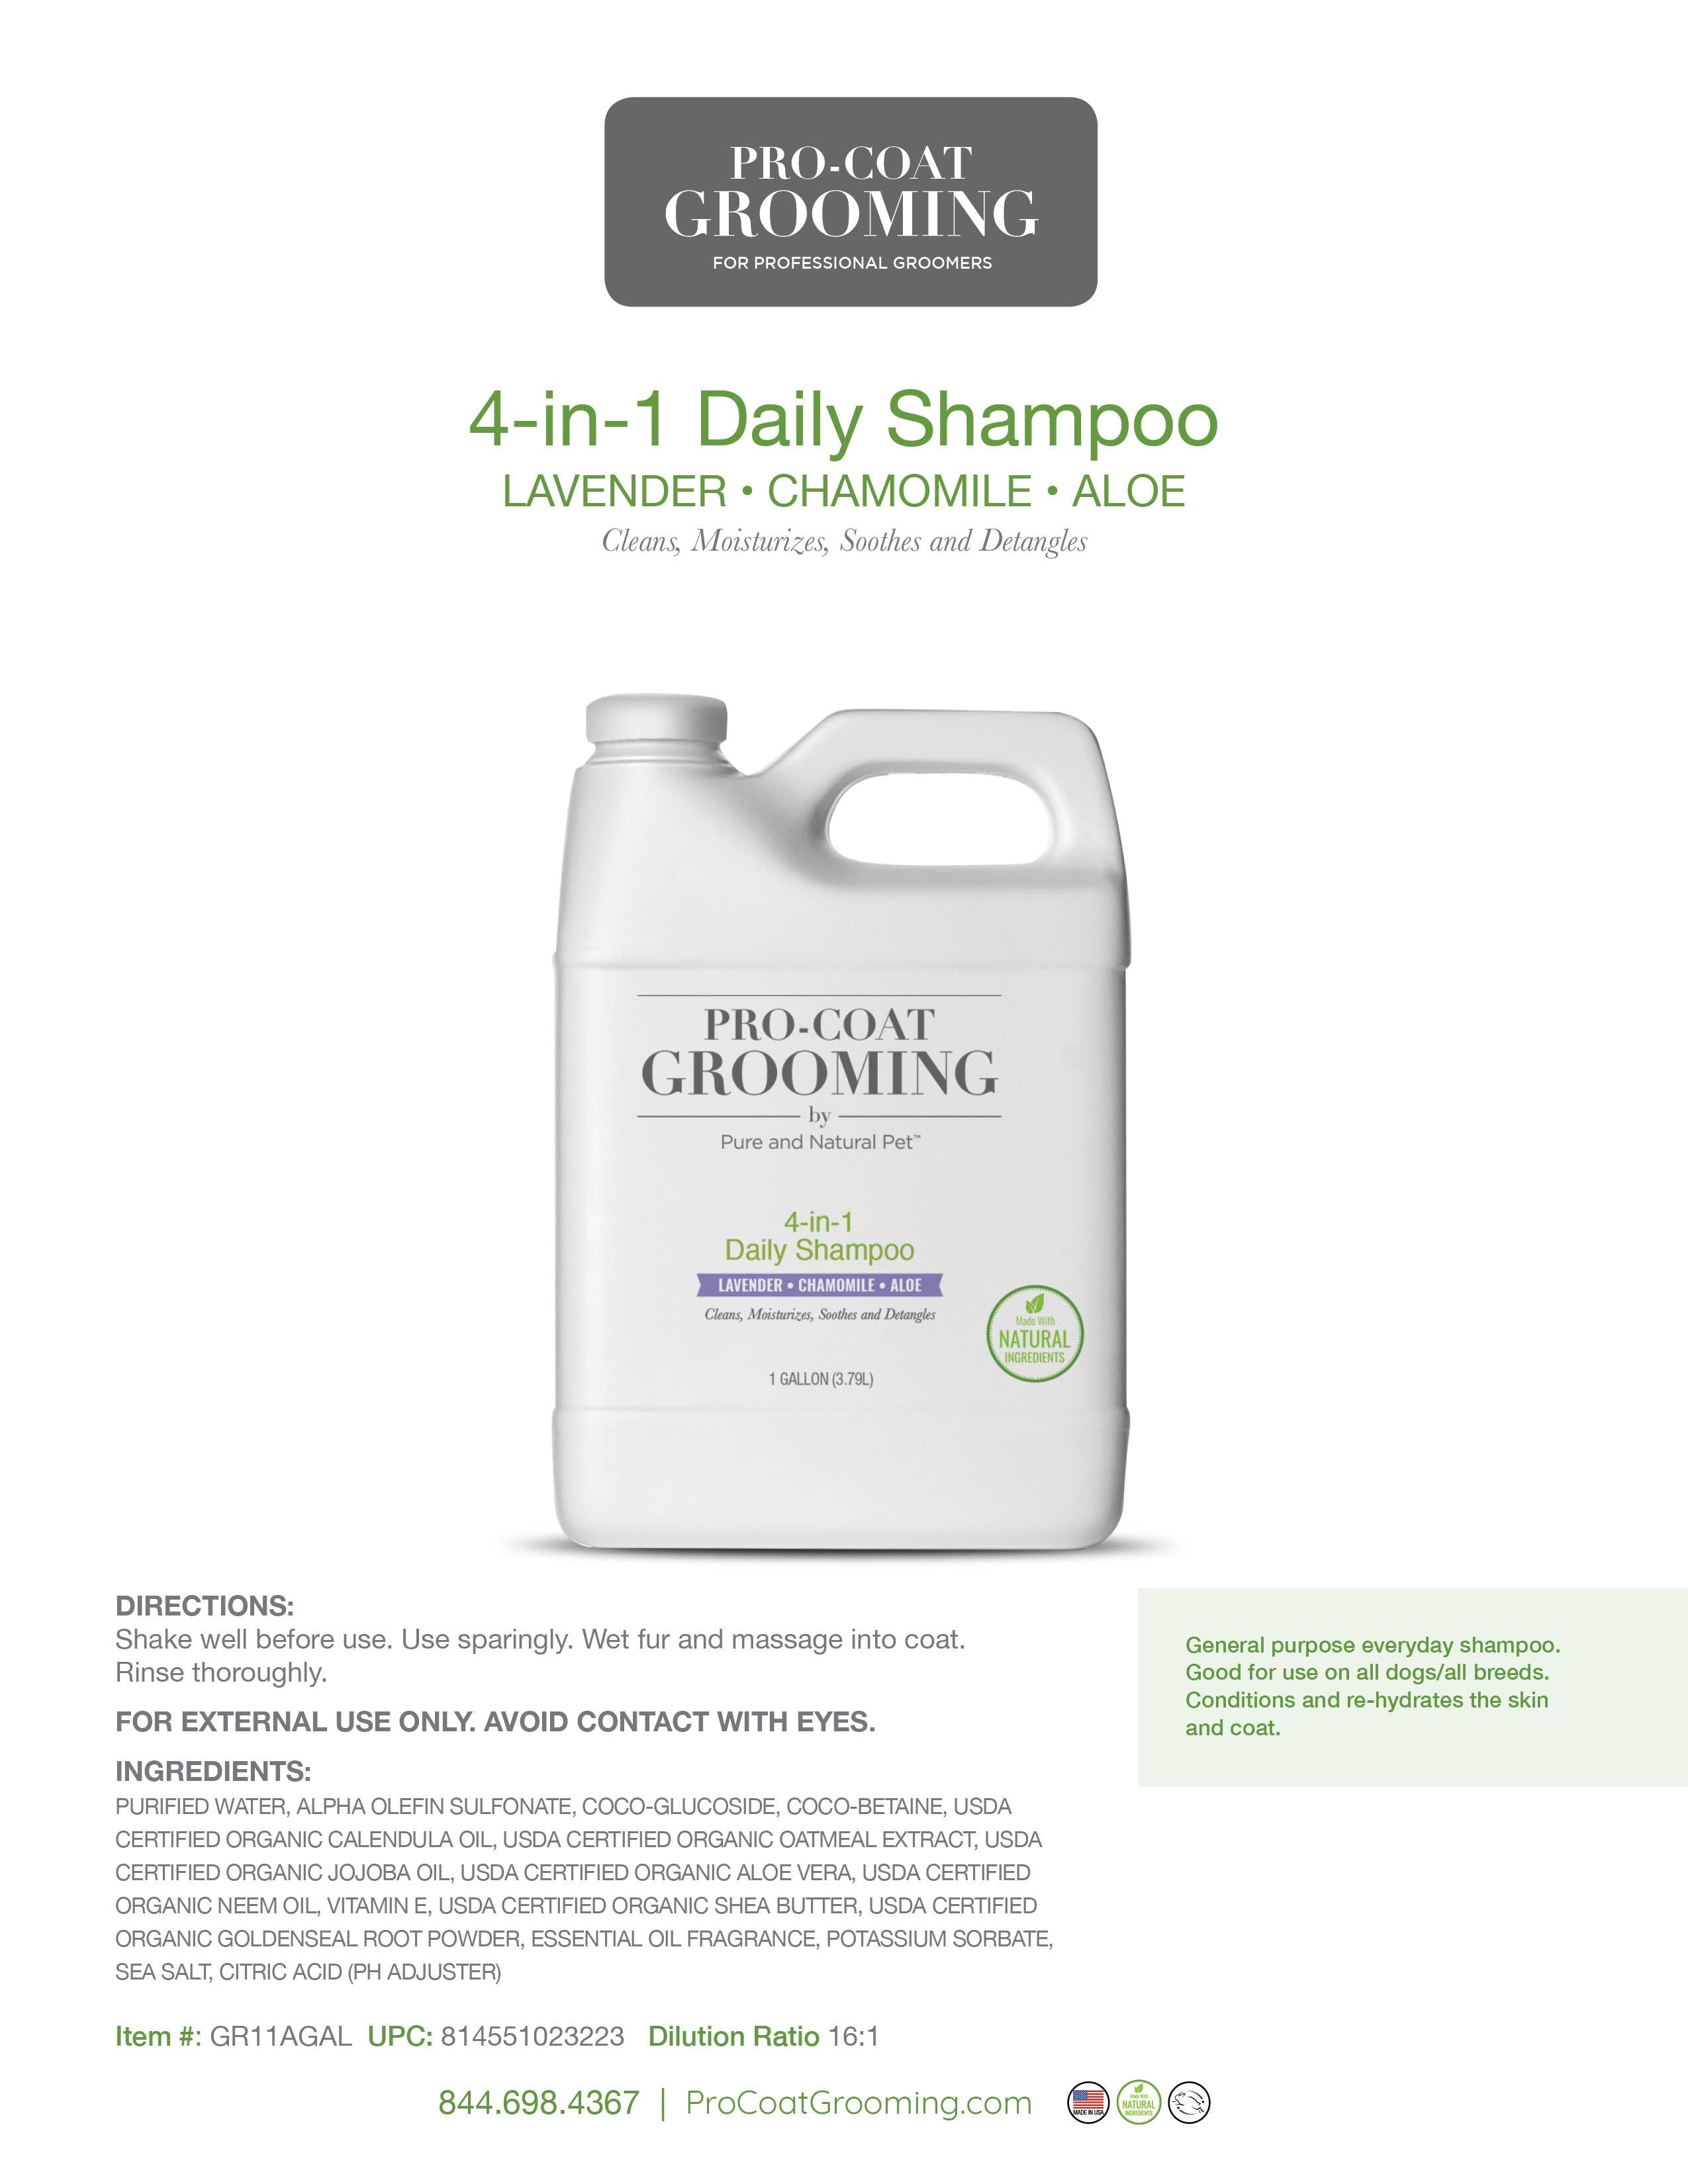 Pure and Natural Pet - 4-in-1 Daily Shampoo for Dogs (Lavender) - 1 Gallon